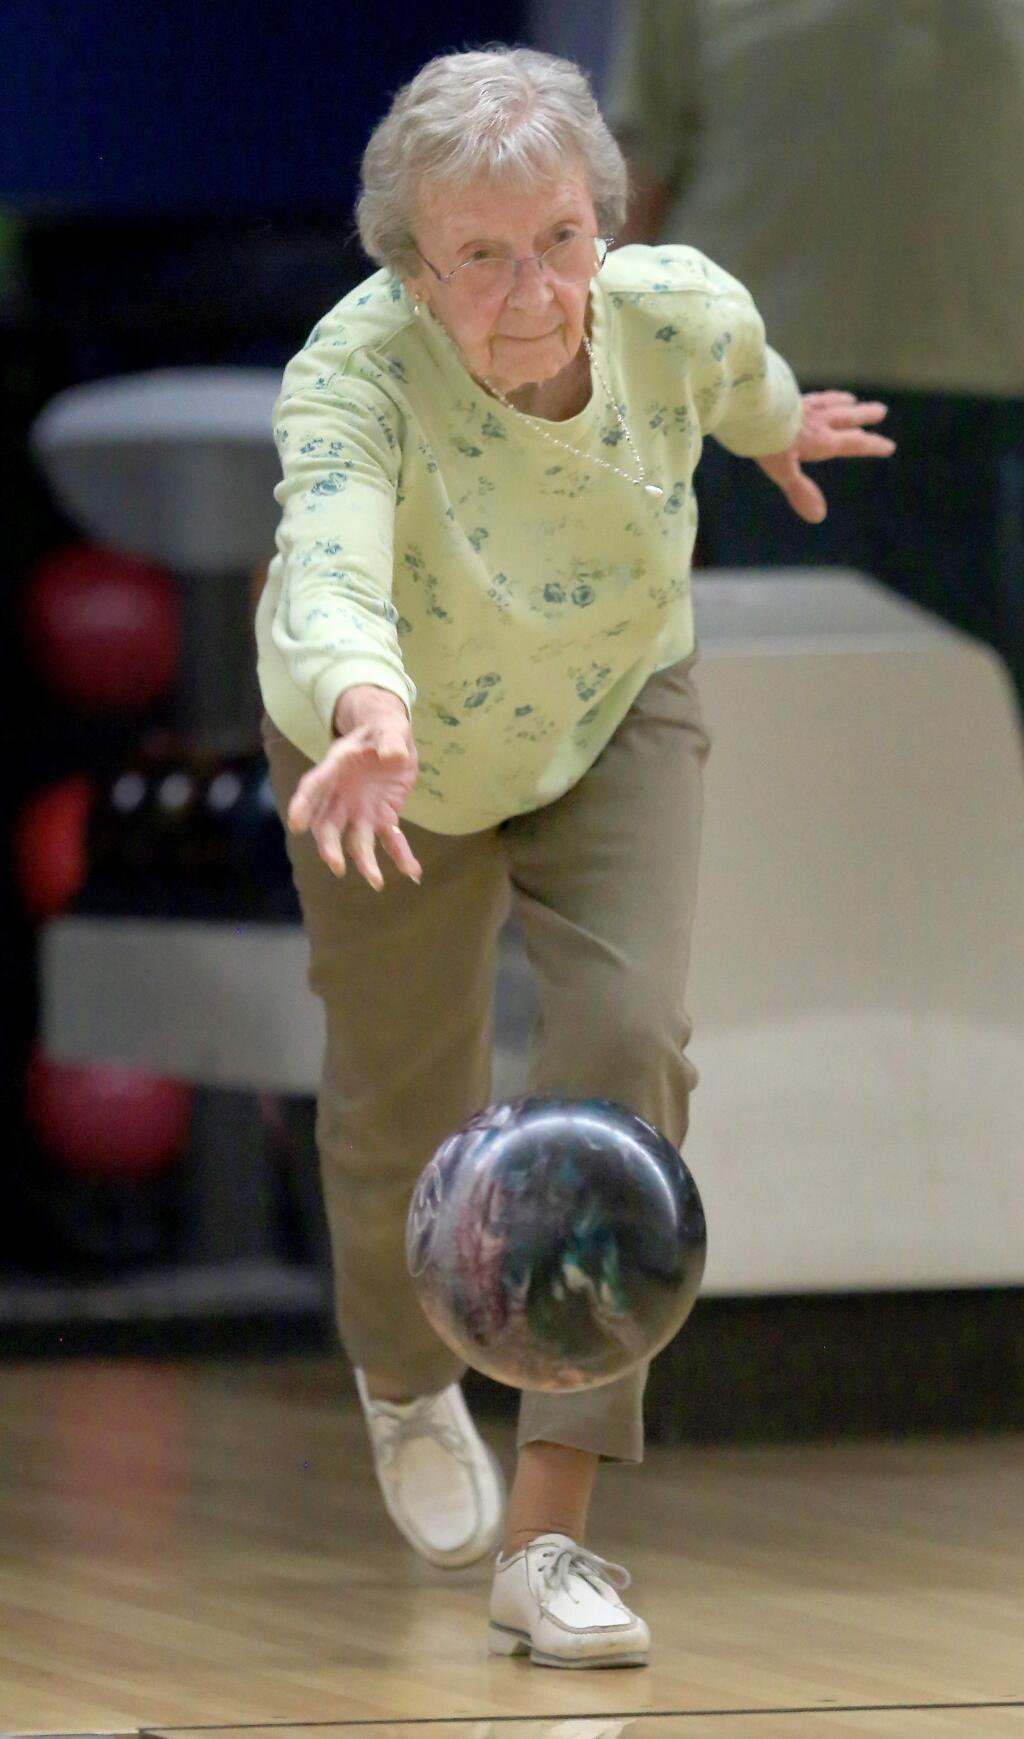 PHOTO: 1 by KENT PORTER / The Press Democrat-Aileen Kauer, 93, bowls earlier this month at the Windsor Bowling Center.